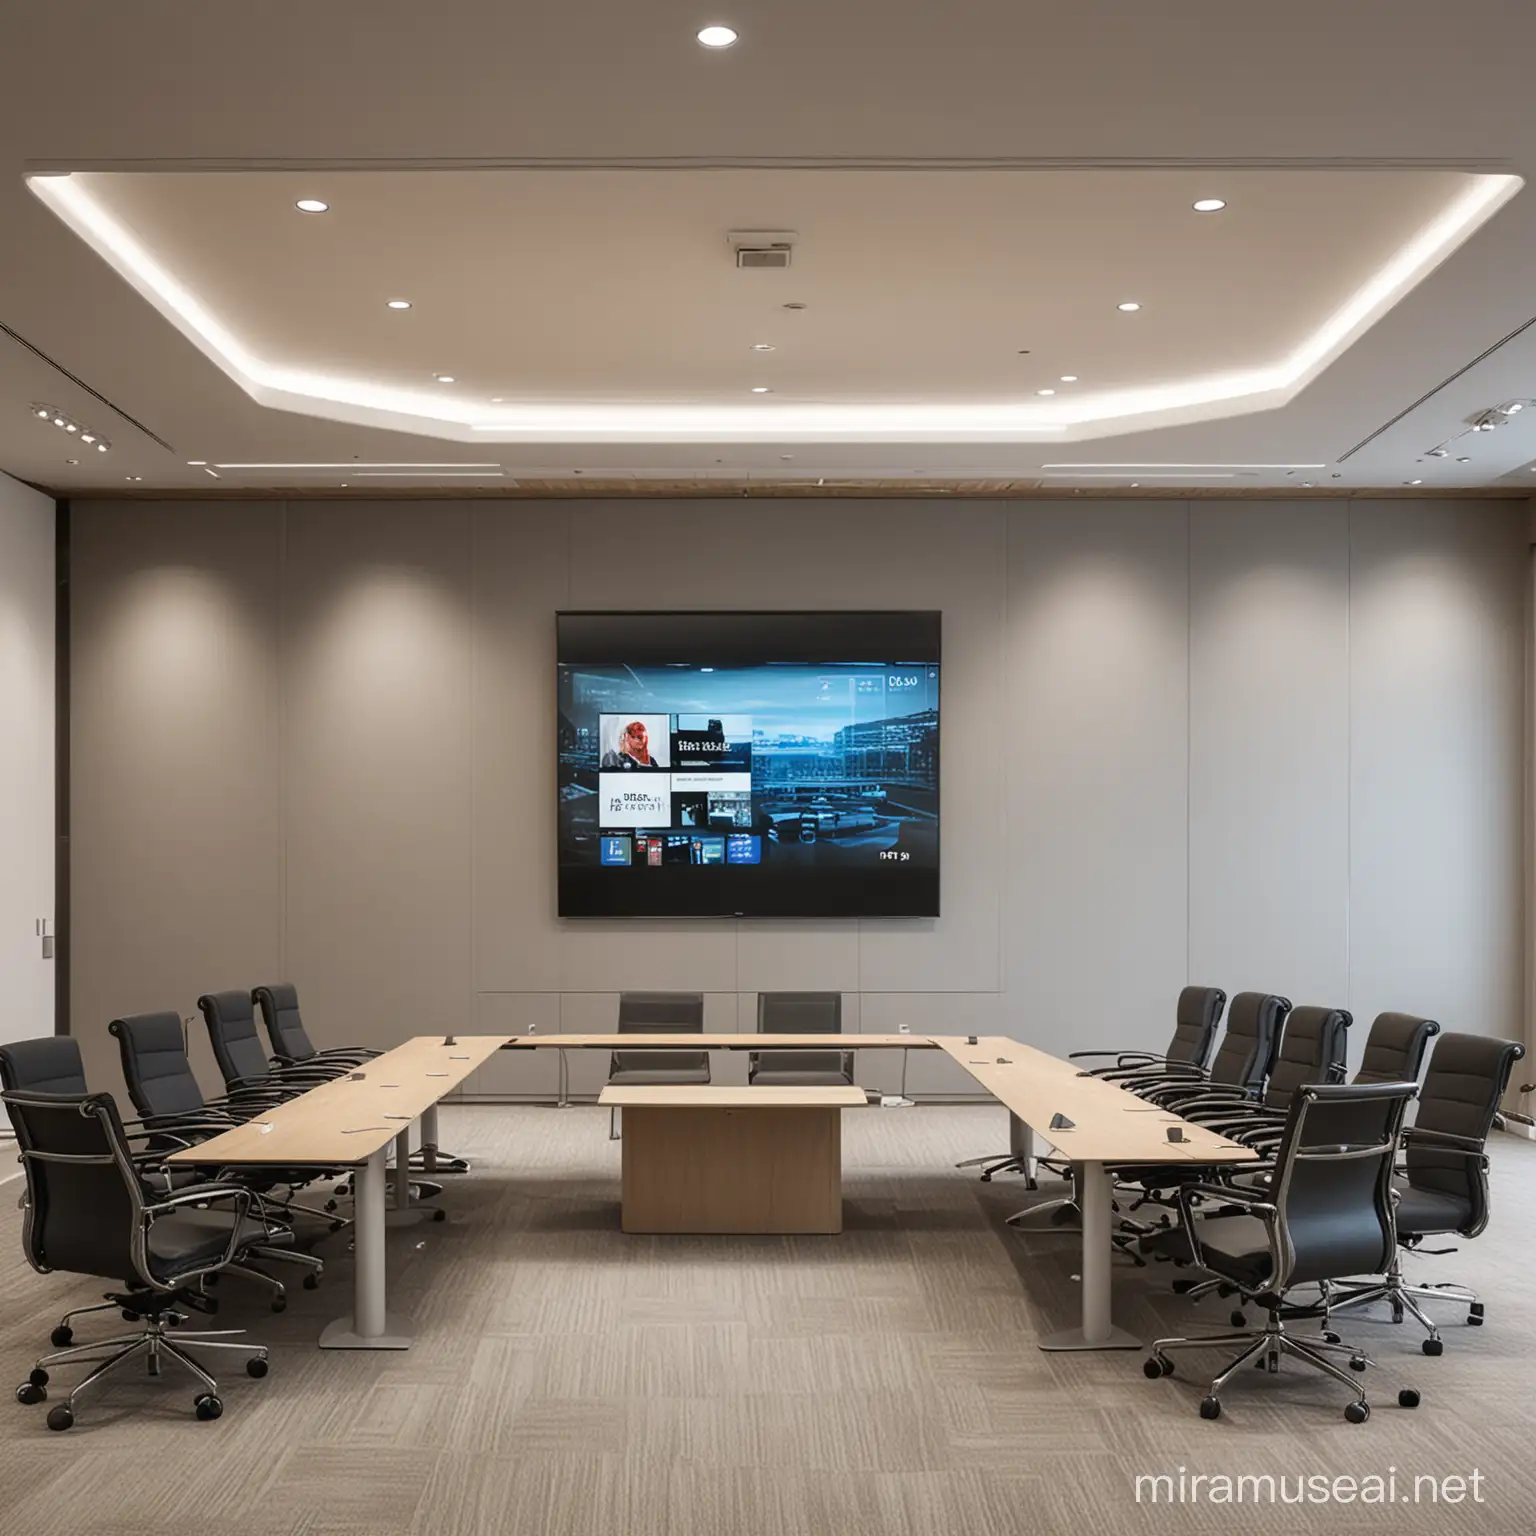 Modern Meeting Room with 9TV Video Wall Design